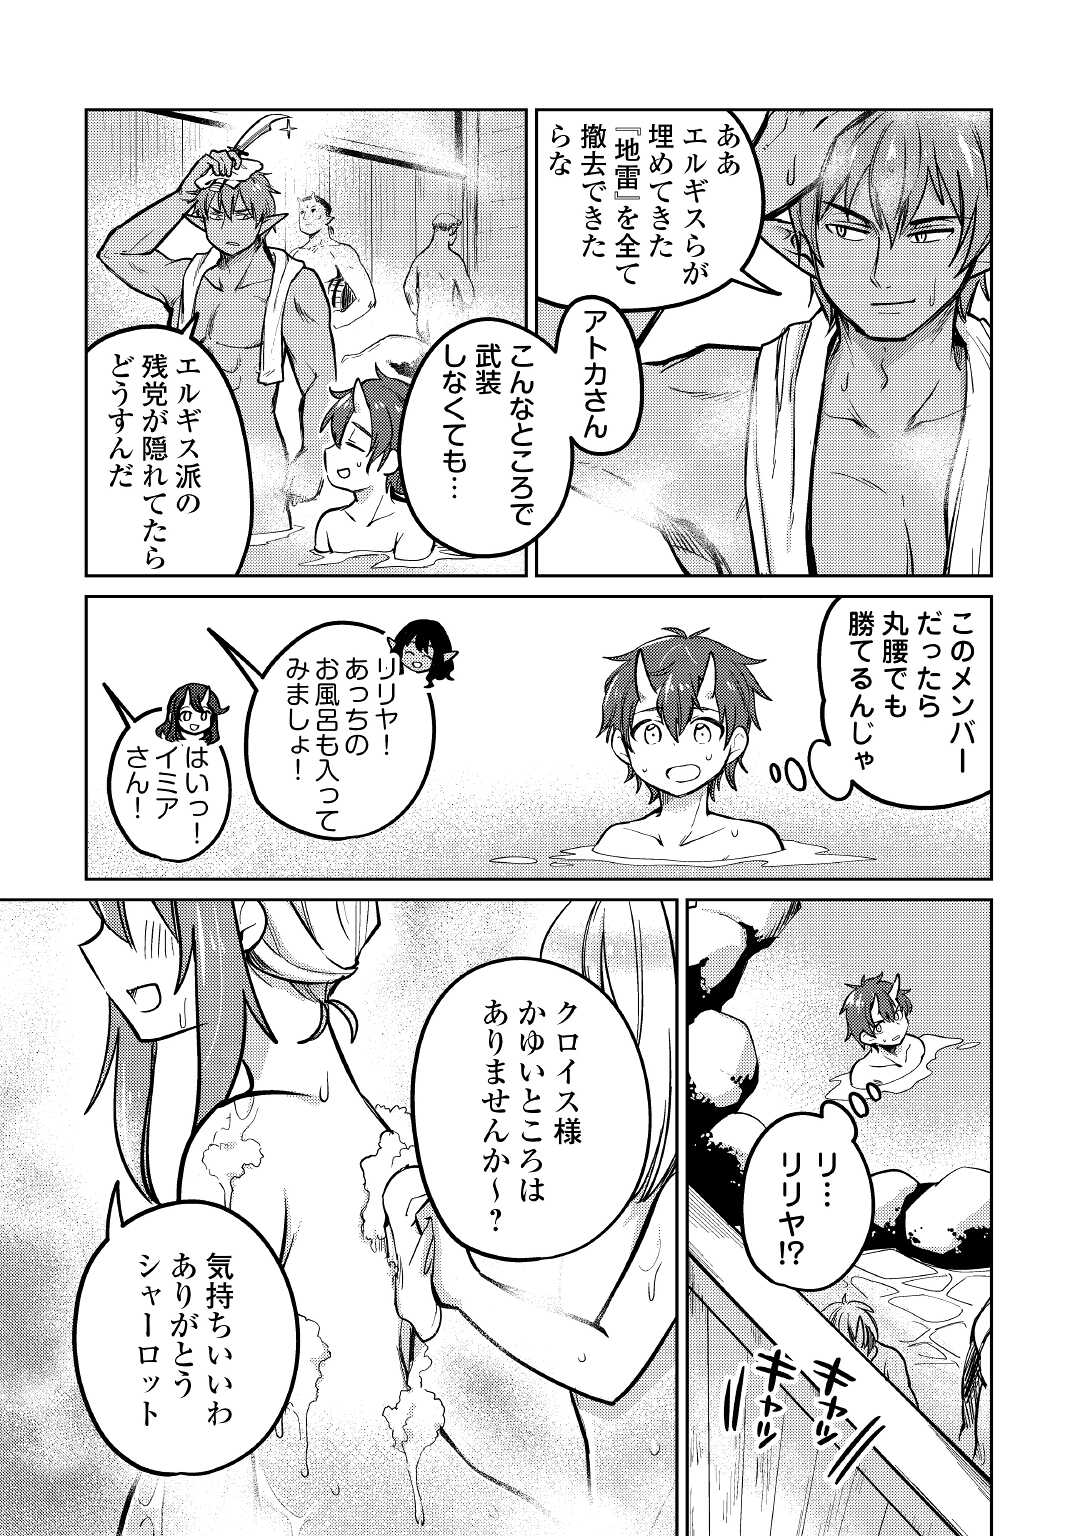 The Former Structural Researcher’s Story of Otherworldly Adventure 第41話 - Page 3